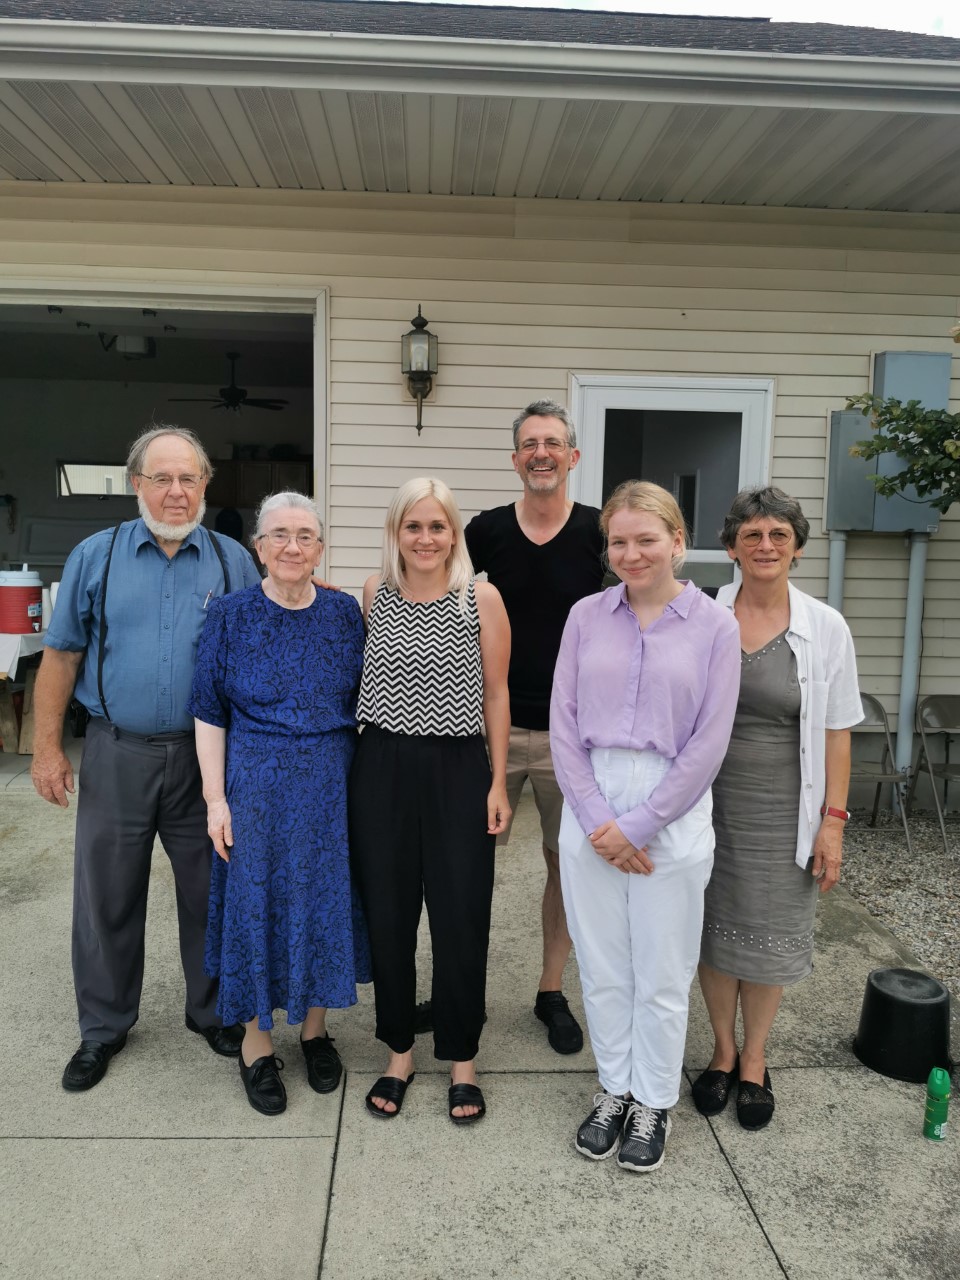 Anja Hasse, Guido Seiler, Coralie Aschwanden and Elvira Glaser (left to right) next to two of our ex-amish informants